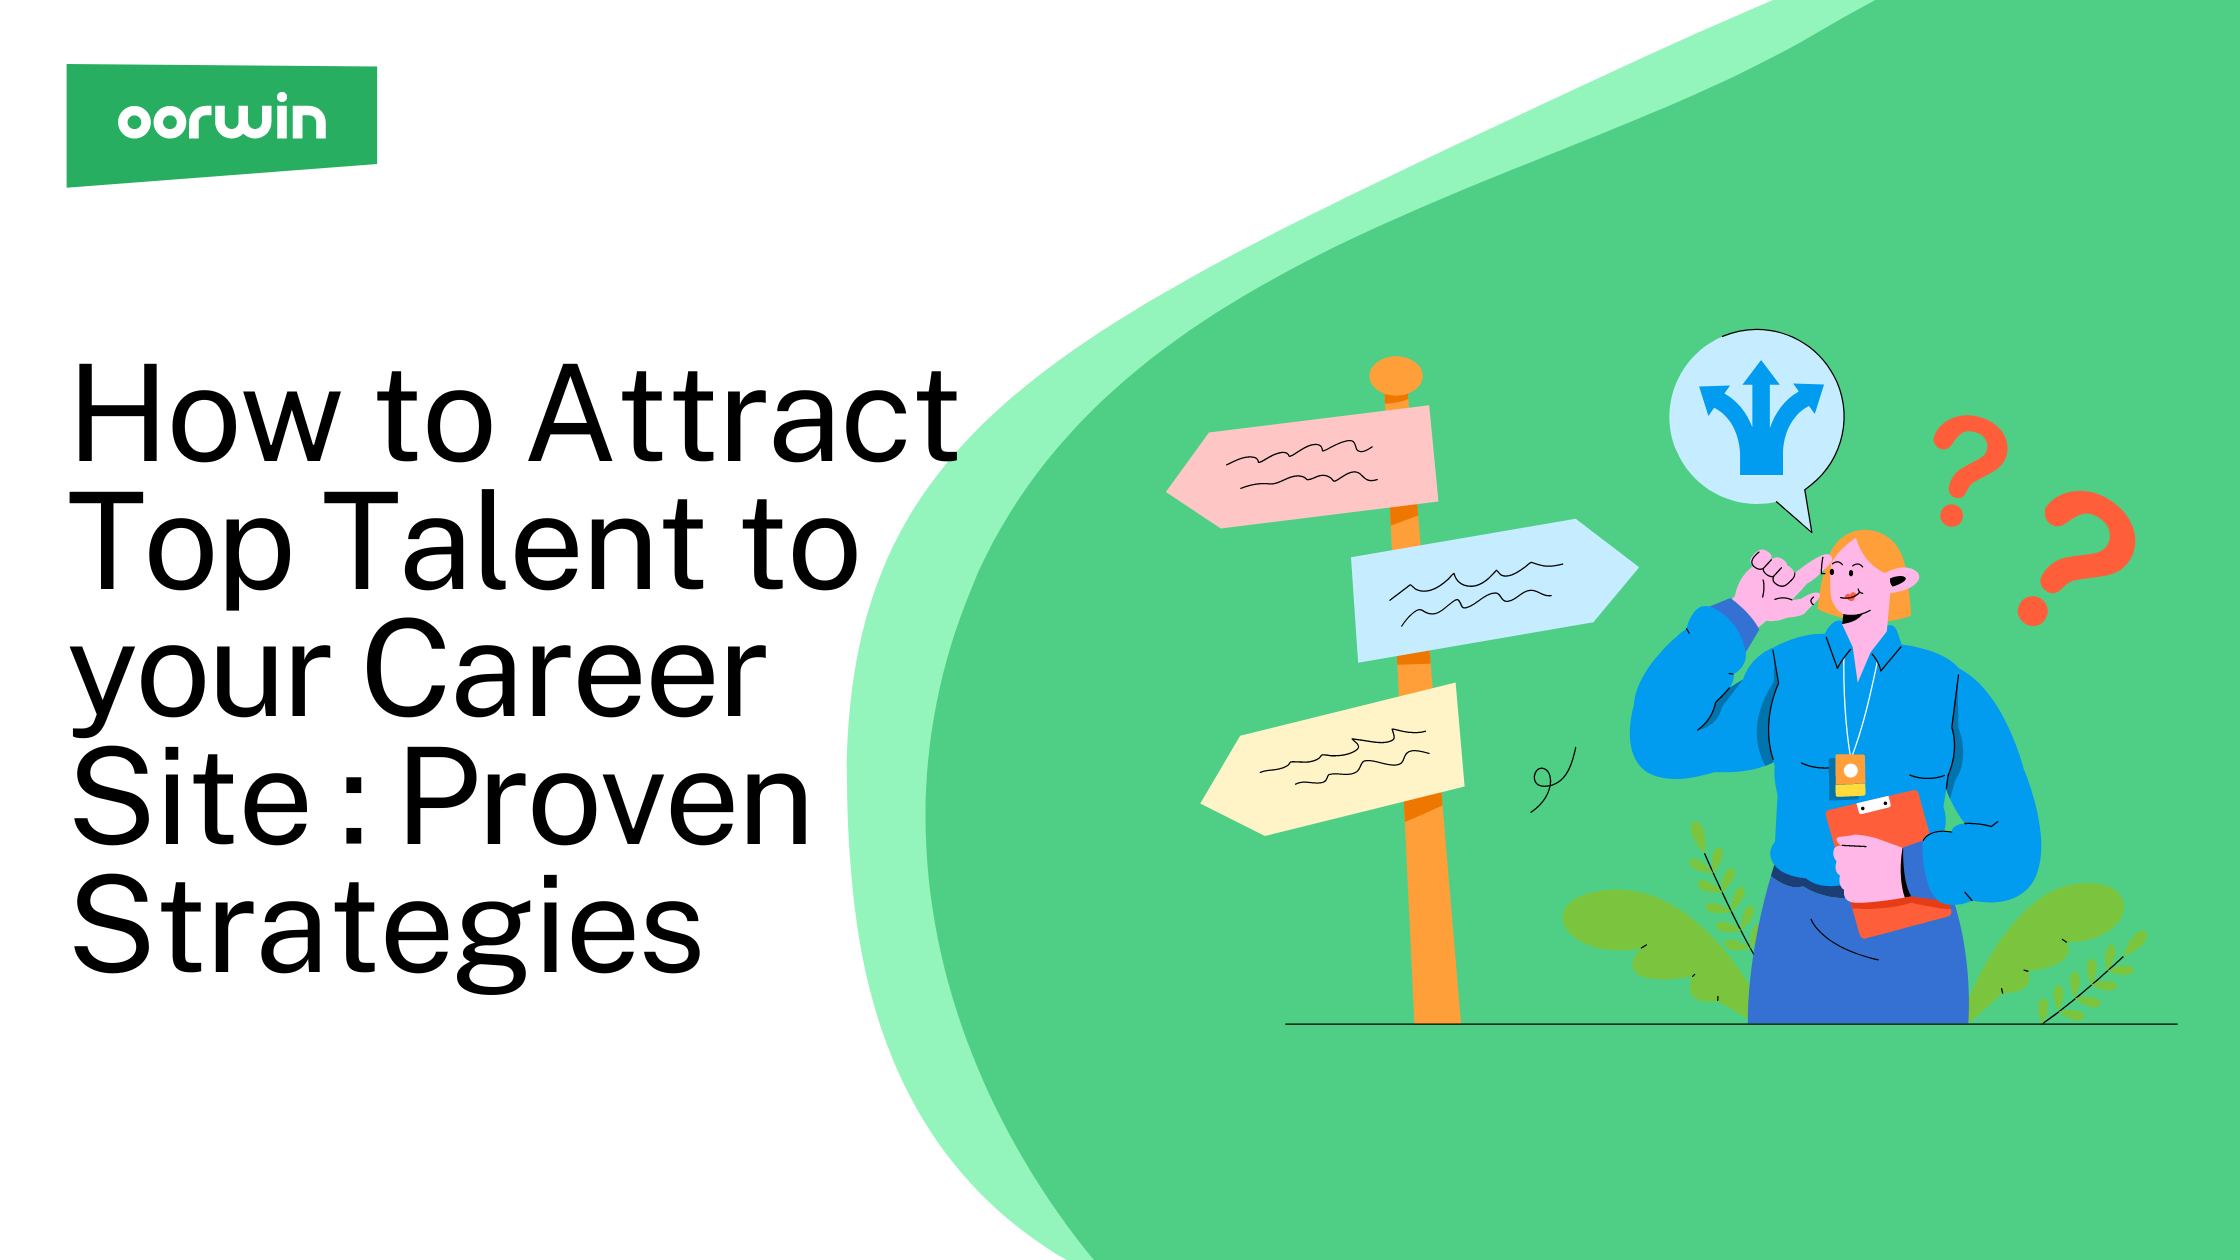 How to Attract Top Talent to your Career Site : Proven Strategies